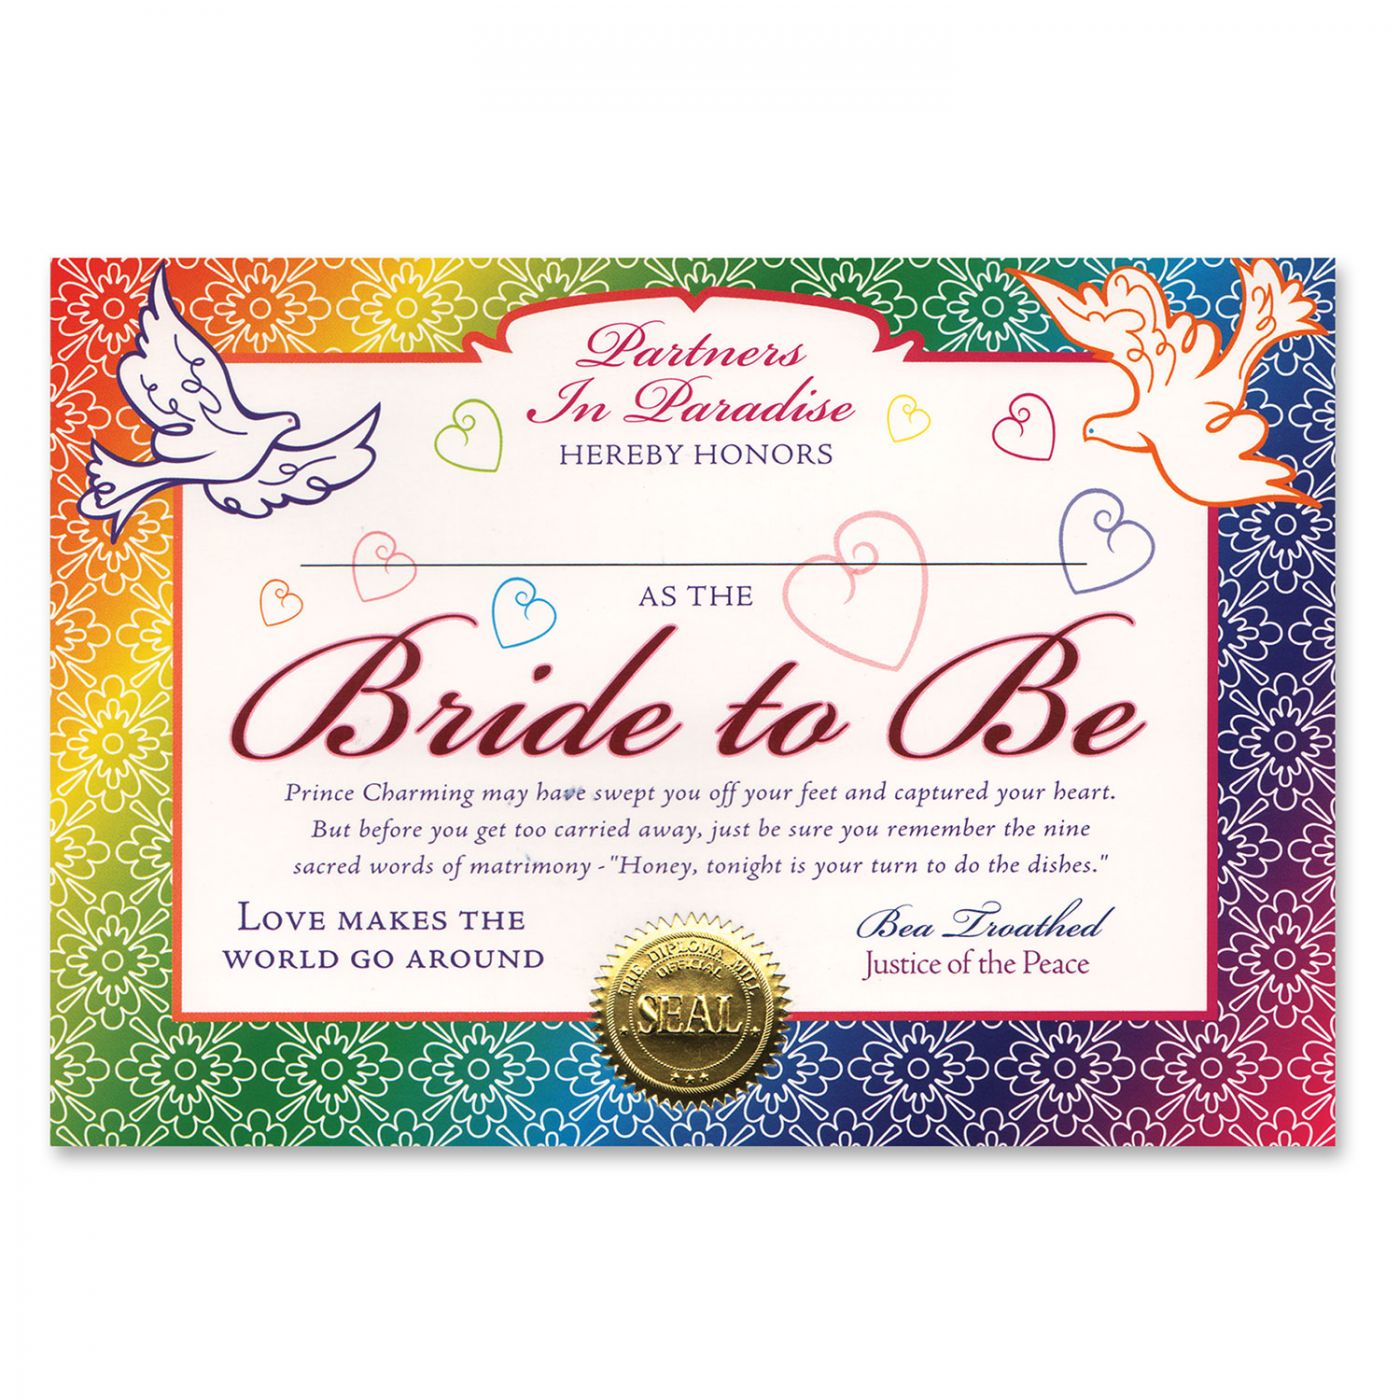 Bride To Be Certificate (6) image